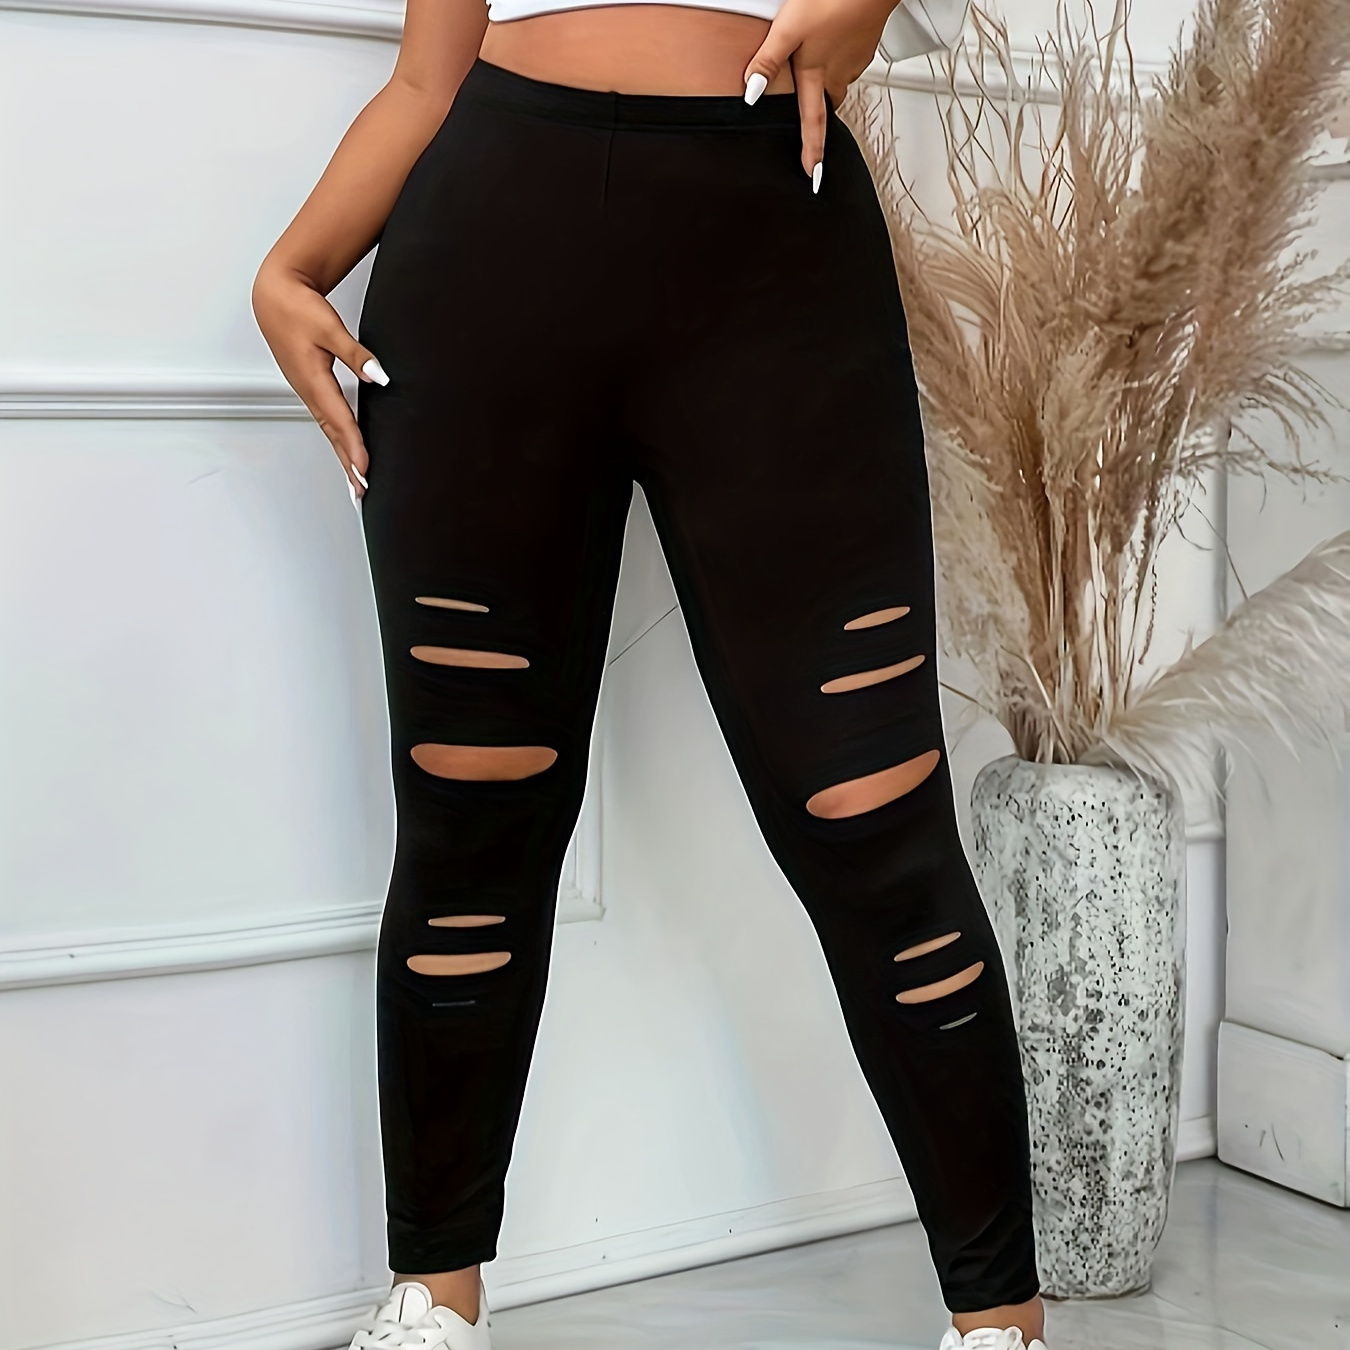 Female Women High Waist Ripped Leggings Women Black Slim Holes Trousers  with Gold Chain Pencil Pants Casual Fashion Clothing 1 M